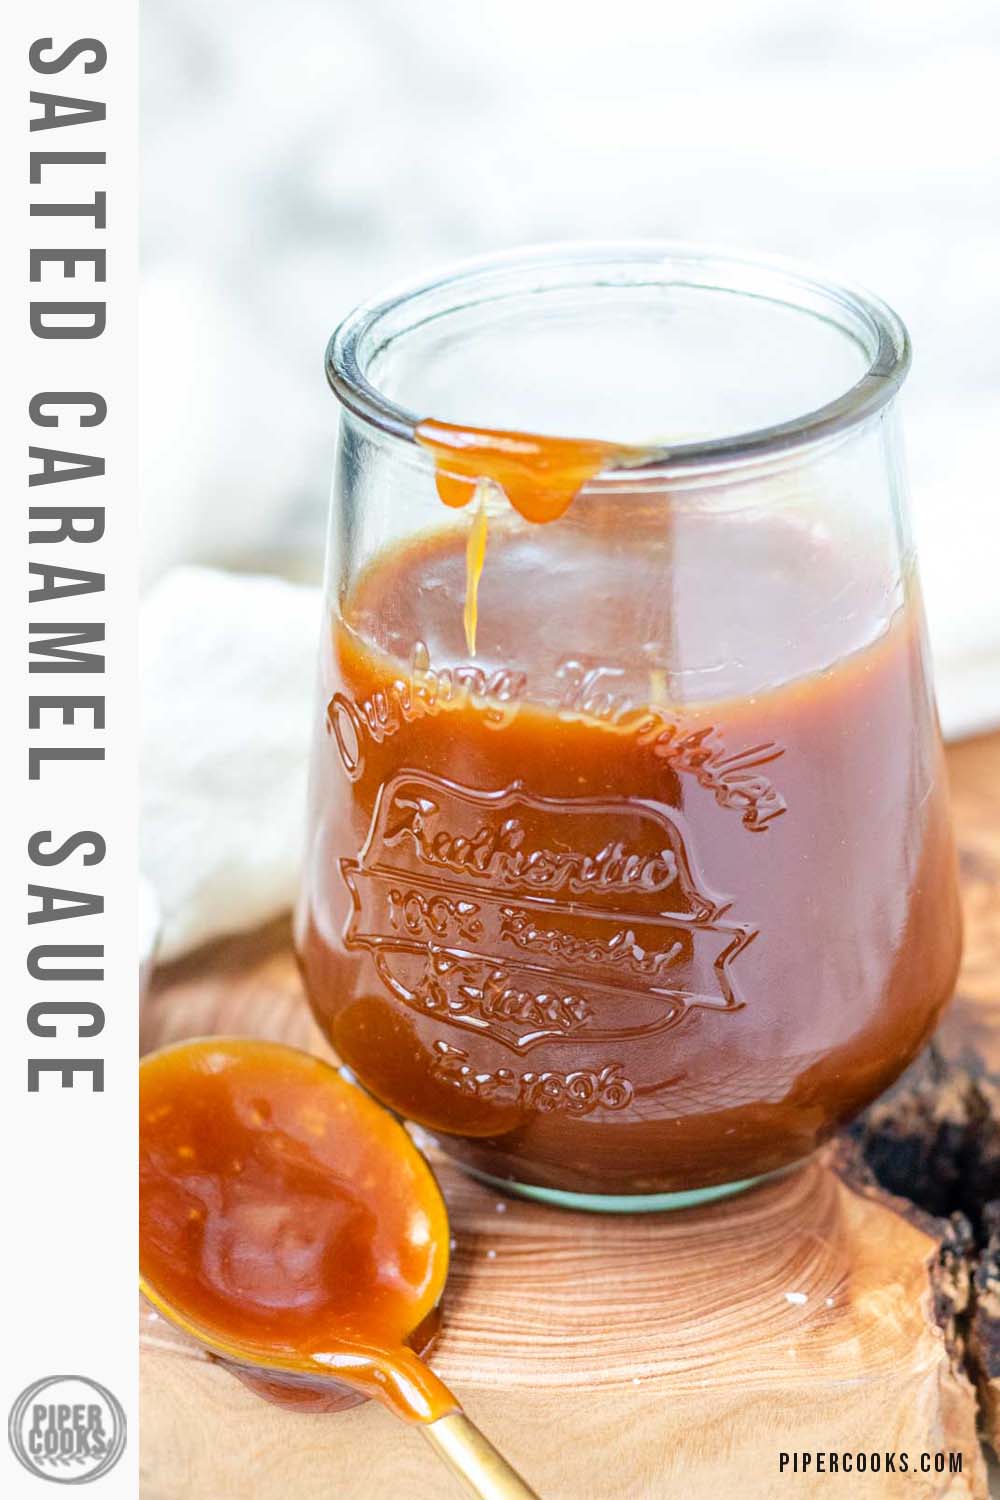 Caramel sauce in a glass with a text title for Pinterest.